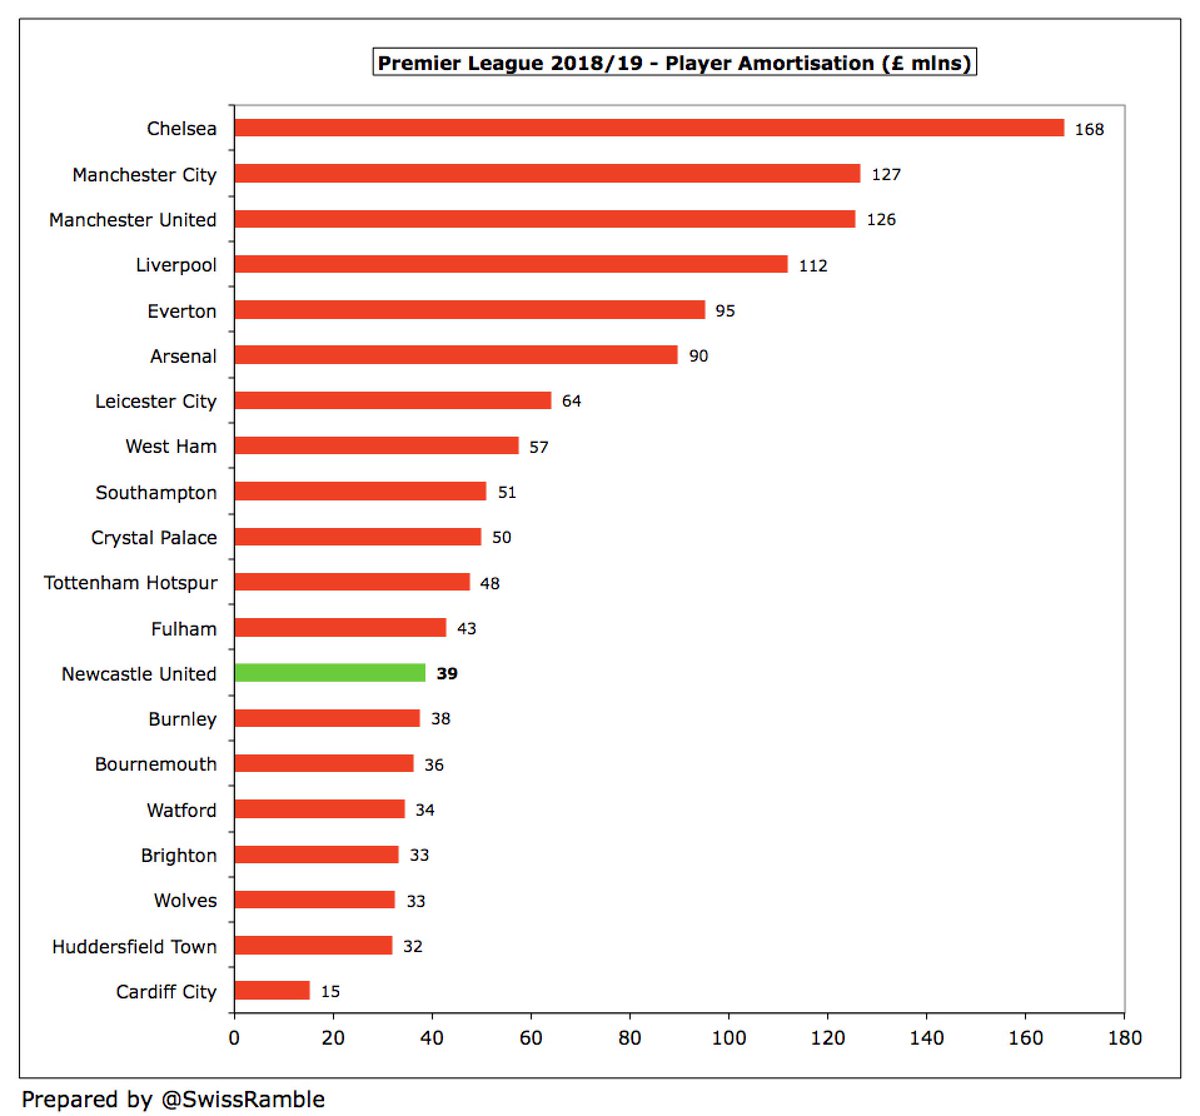 As a result,  #NUFC player amortisation of £39m is firmly in the bottom half of the Premier League table, just behind  #FFC £43m and  #THFC £48m. However, for more context, it is less than a quarter of big-spending  #CFC £168m.